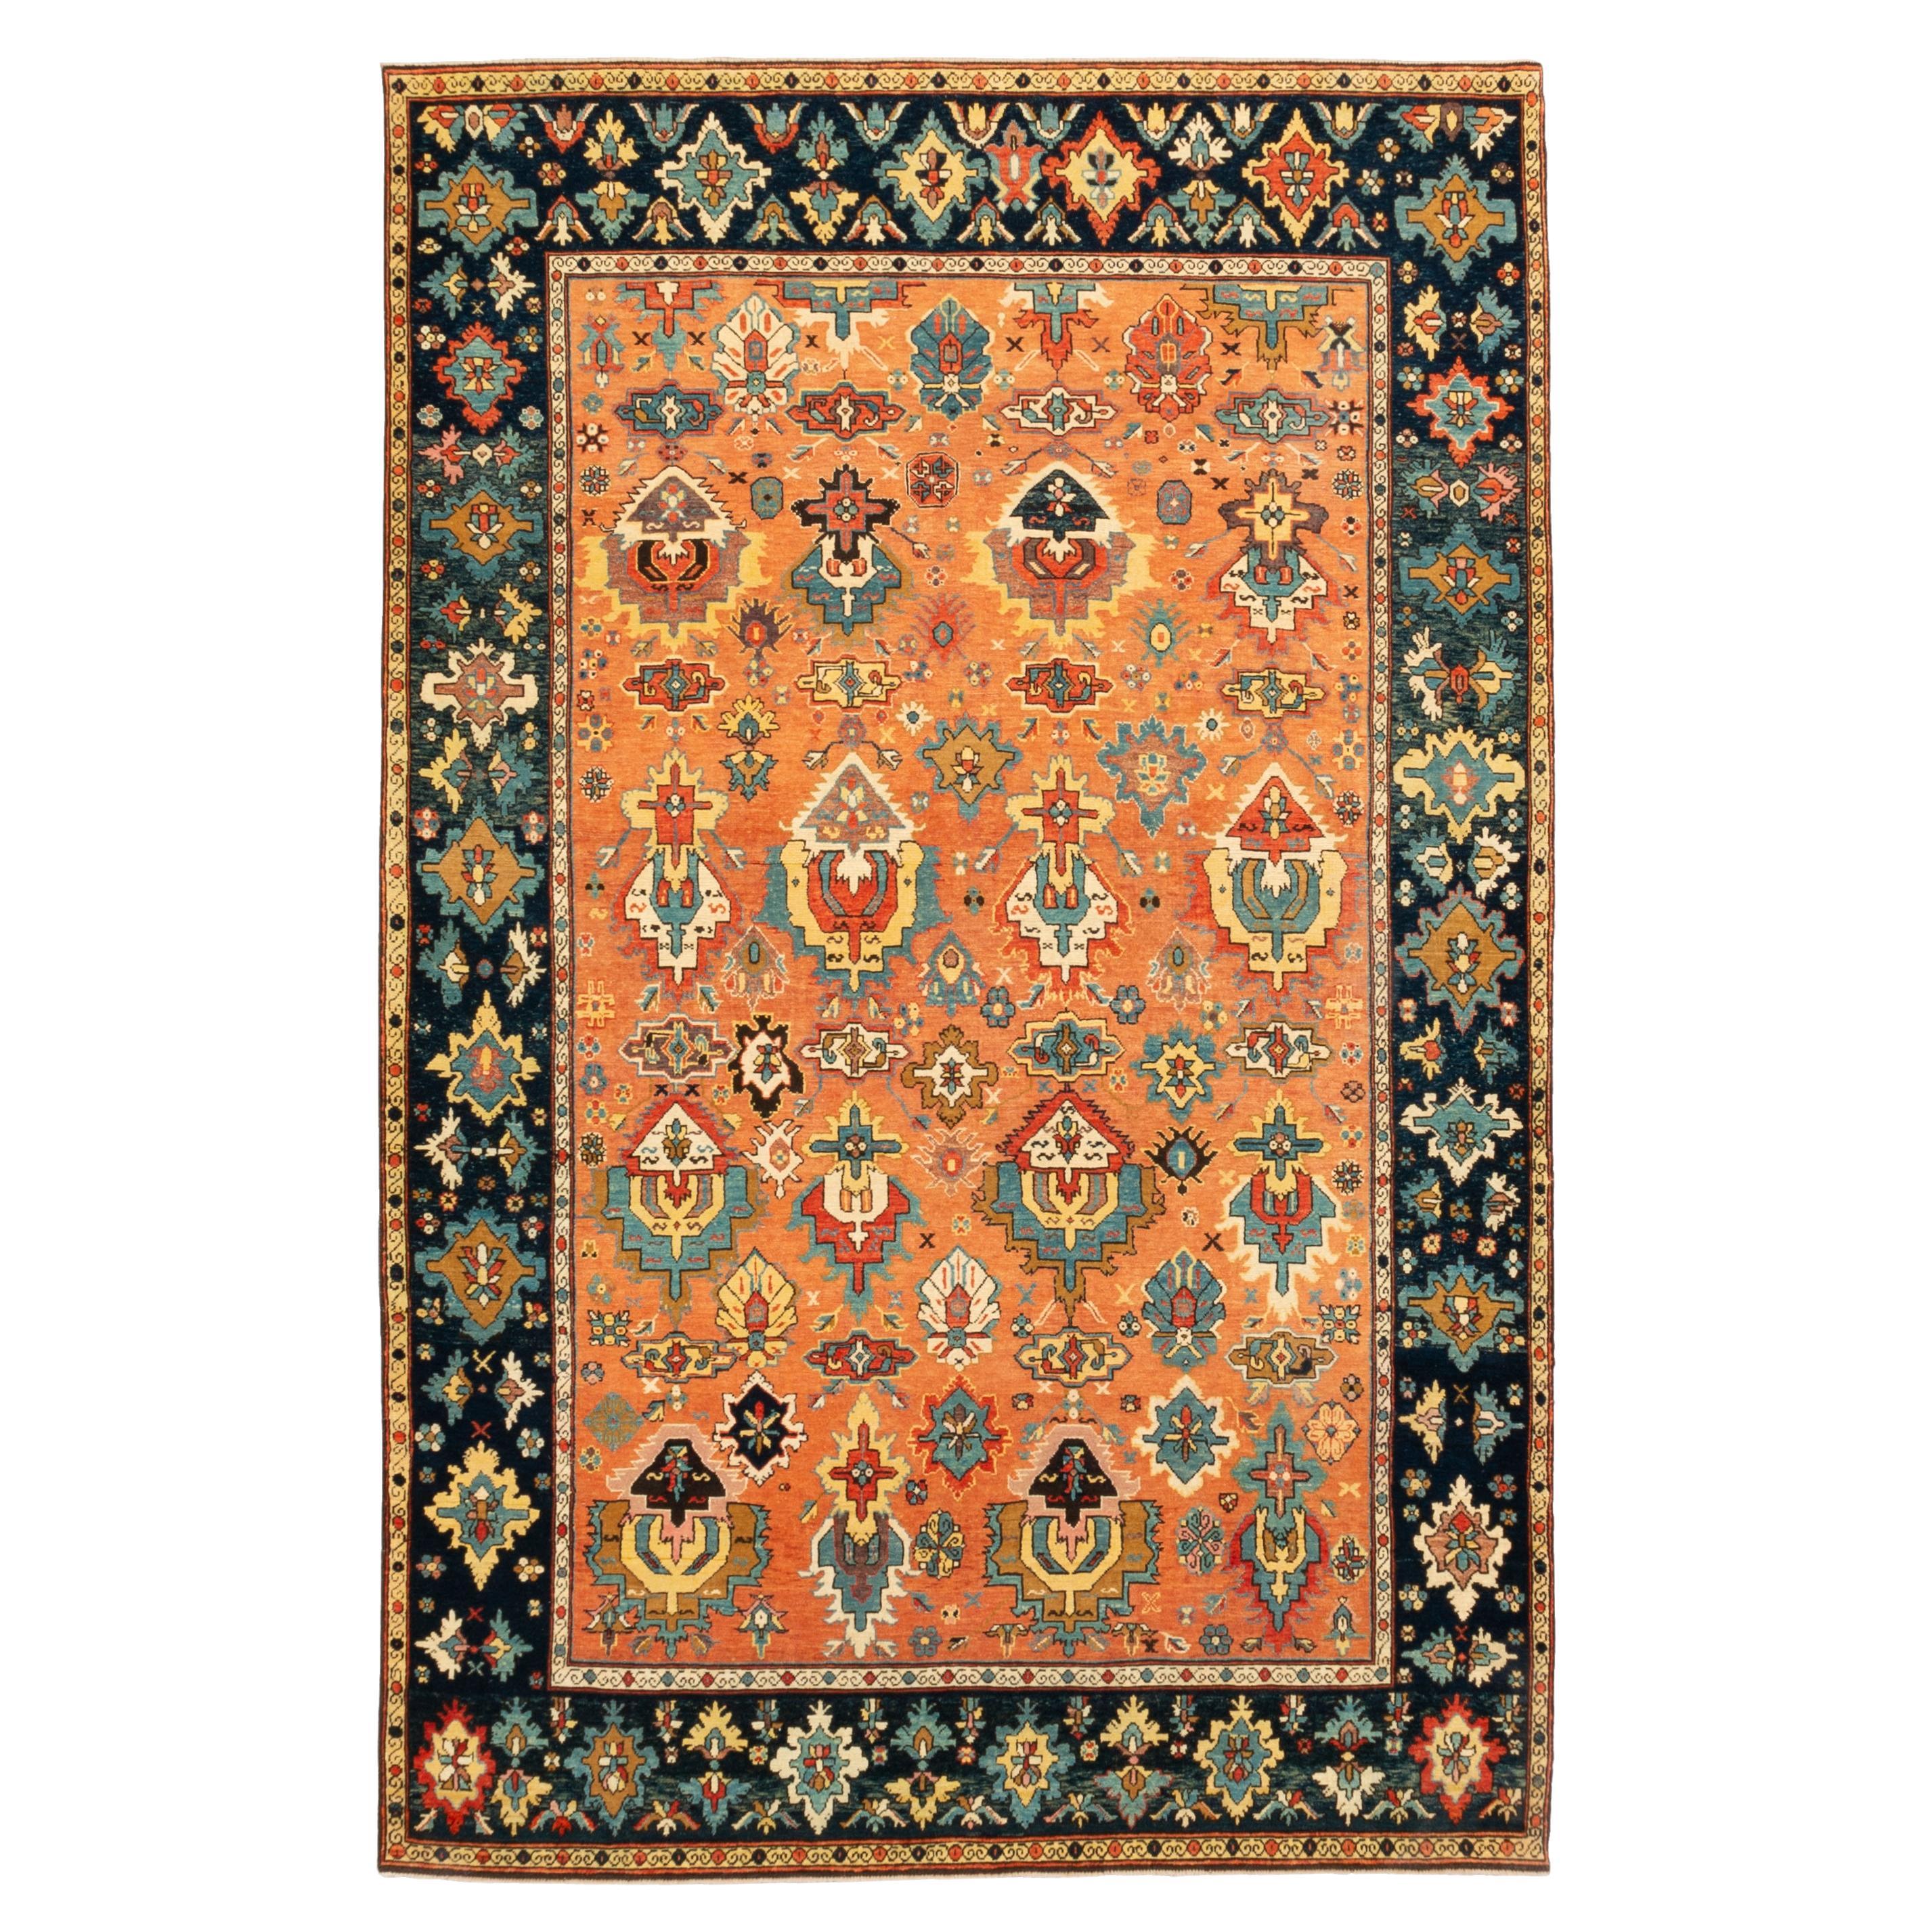 Ararat Rugs Palmettes in the Esfahan Manner Rug, Revival Carpet, Natural Dyed For Sale